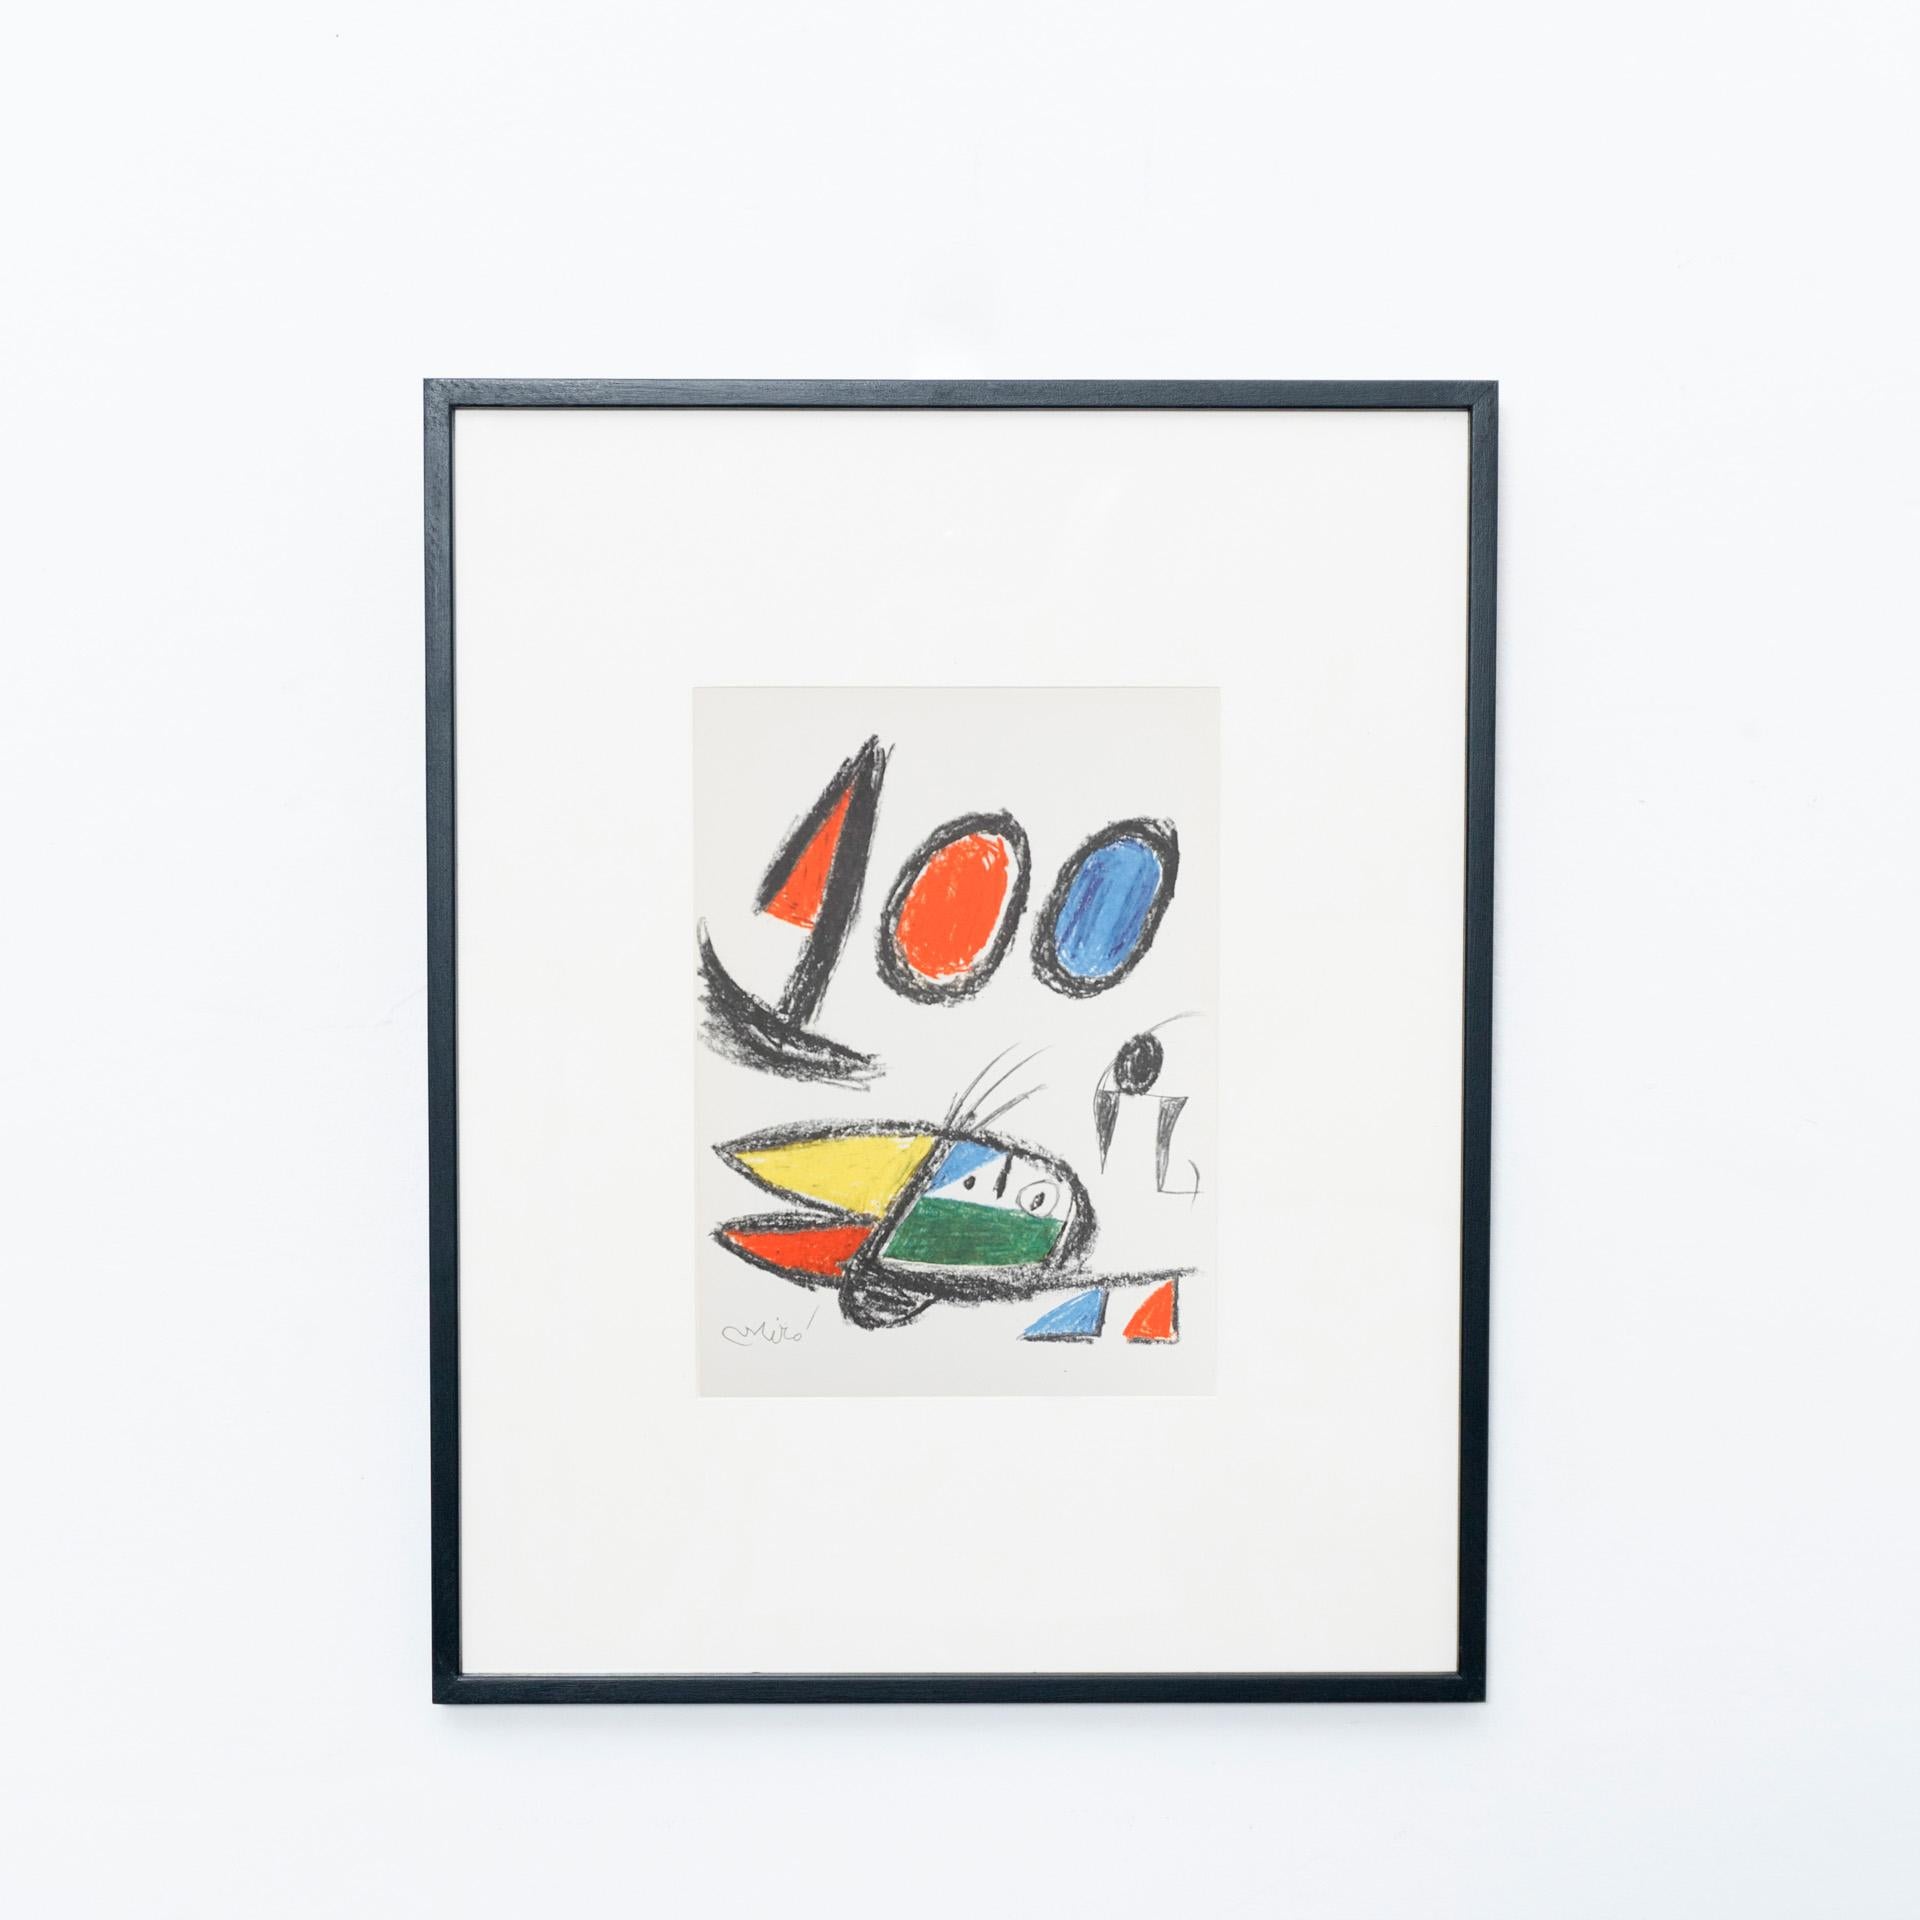 Photolithography by Miró, circa 1970.

Stamped rotogravure reproduction of series by Bolaffiarte. Limited edition of 5000.

Exemplary number 4709.

The photolithography comes framed. The frame on the photos is just an example, it will be